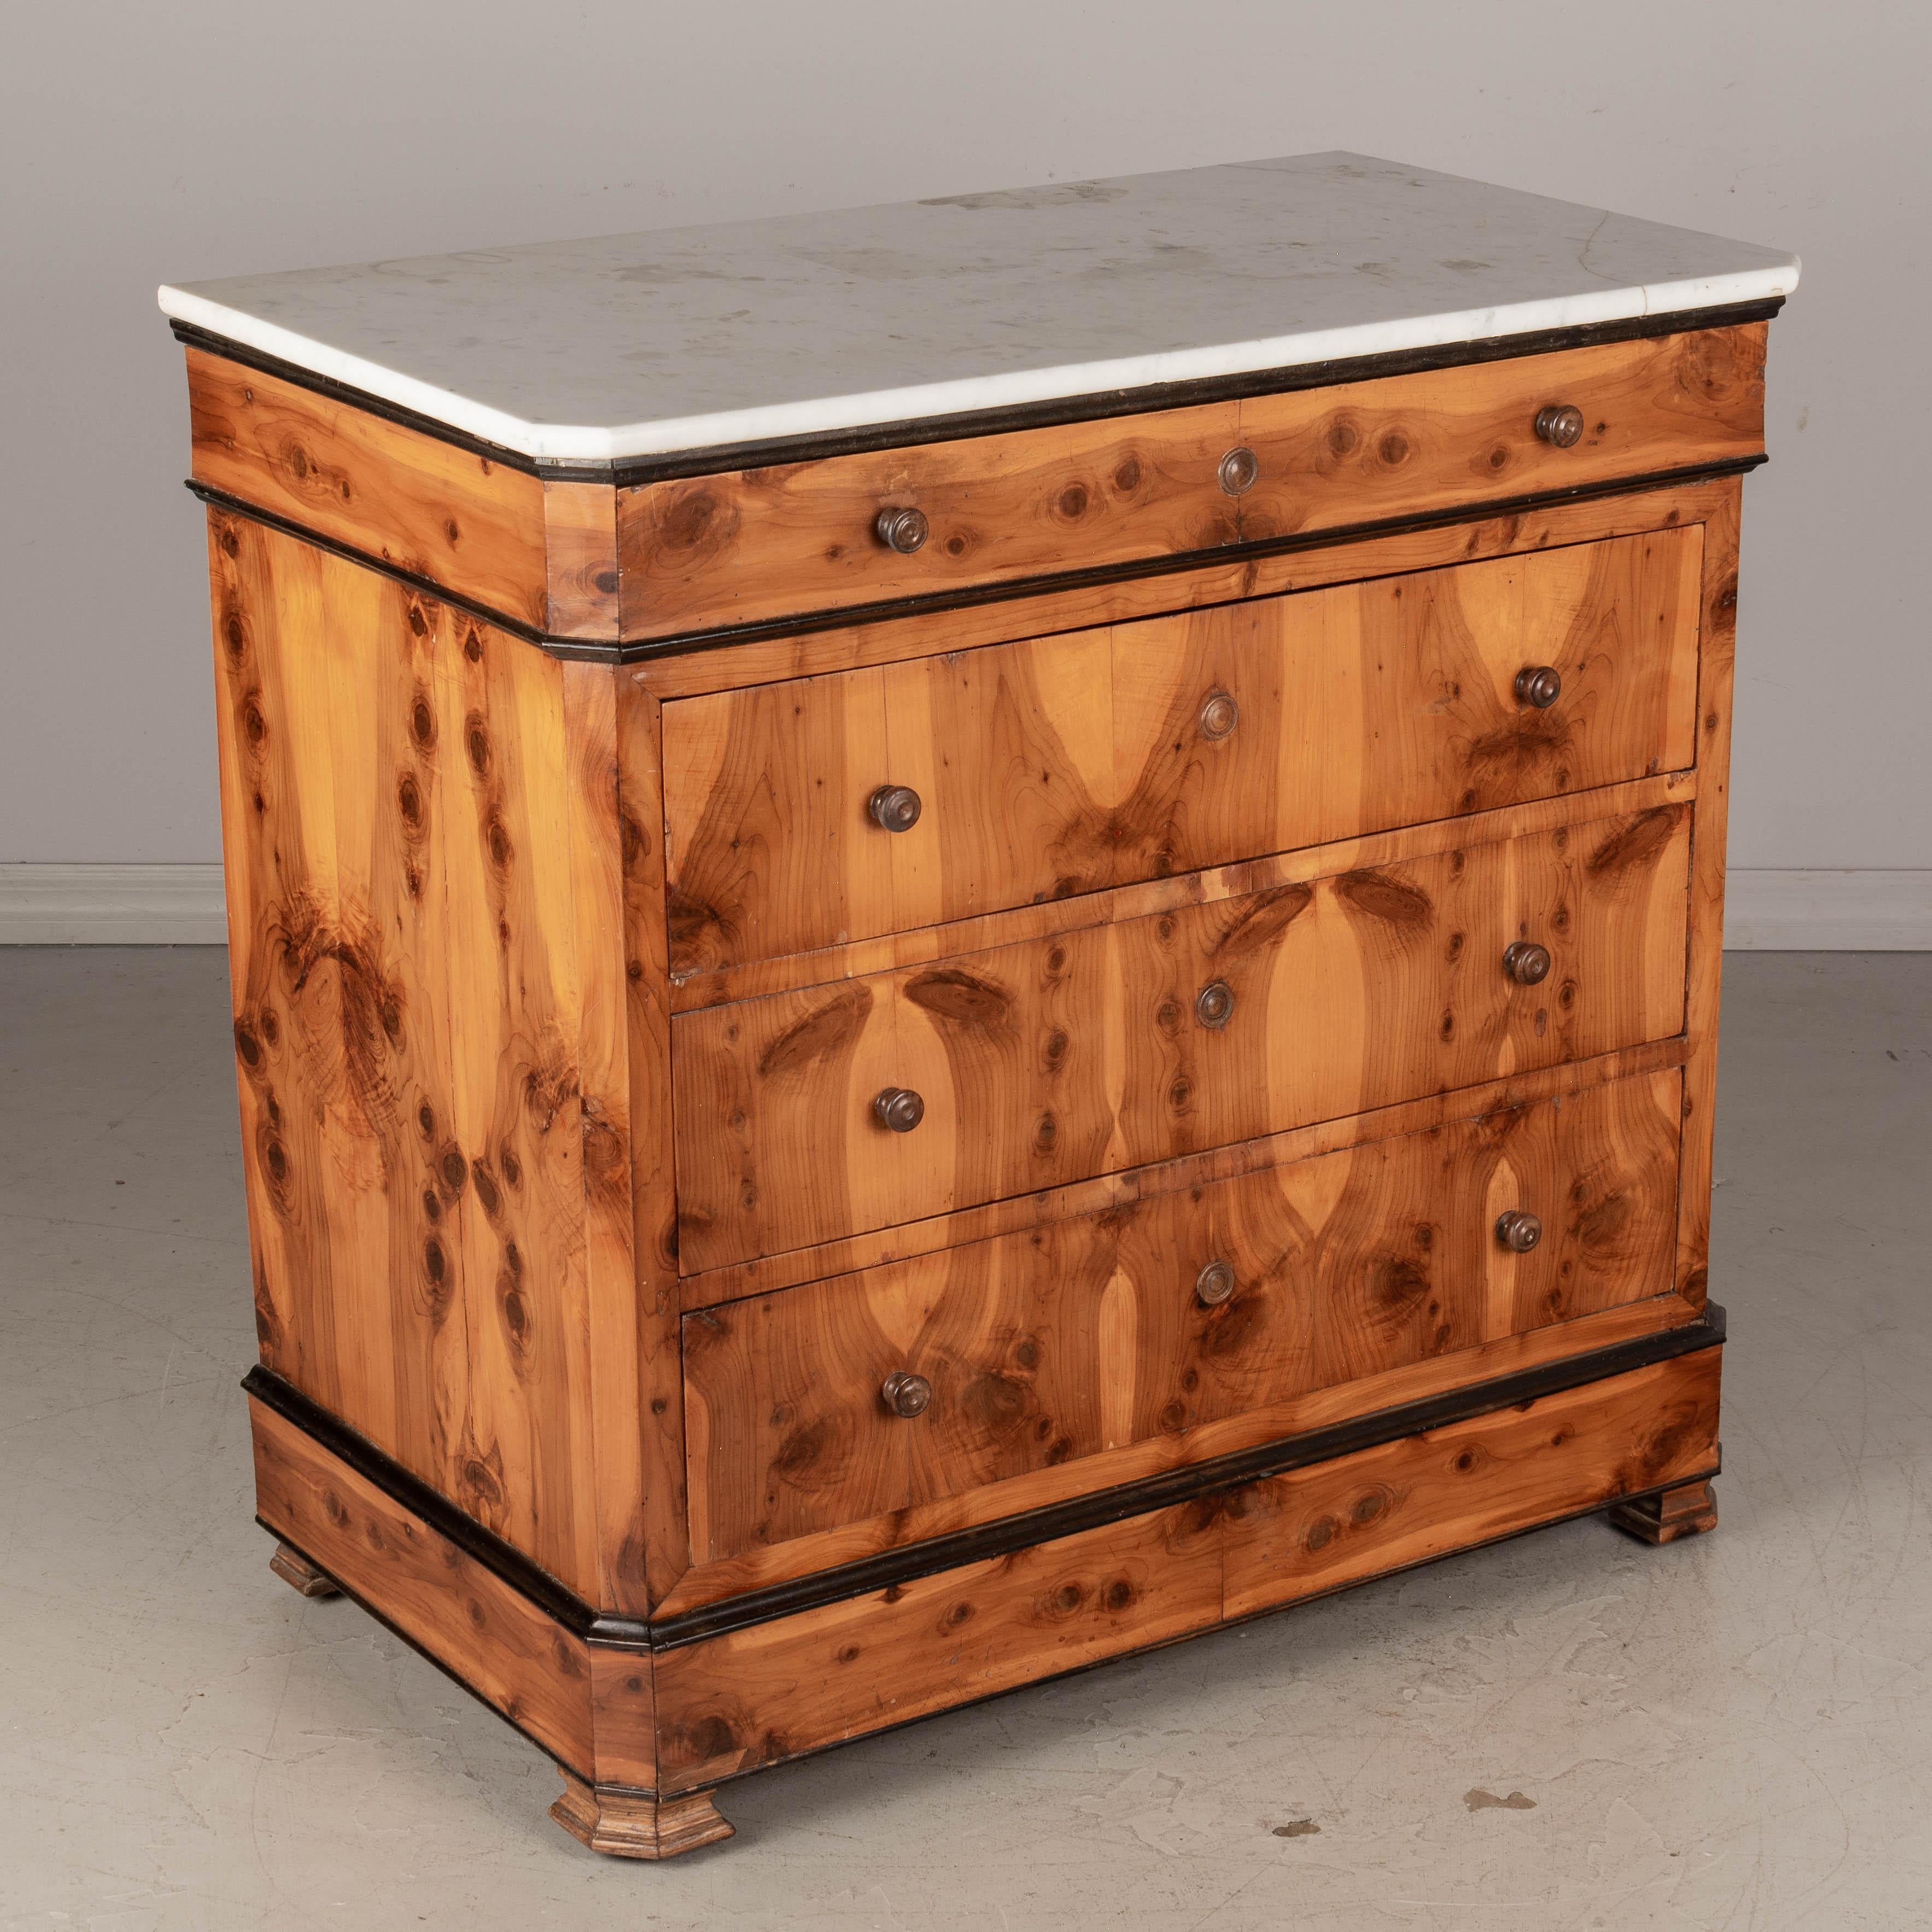 A 19th century French Louis Philippe marble top commode. Nicely patterned book matched cedar veneer over pine with black painted accents. Five dovetailed drawers including a hidden drawer at the plinth. Locks are missing and the wood knobs are not